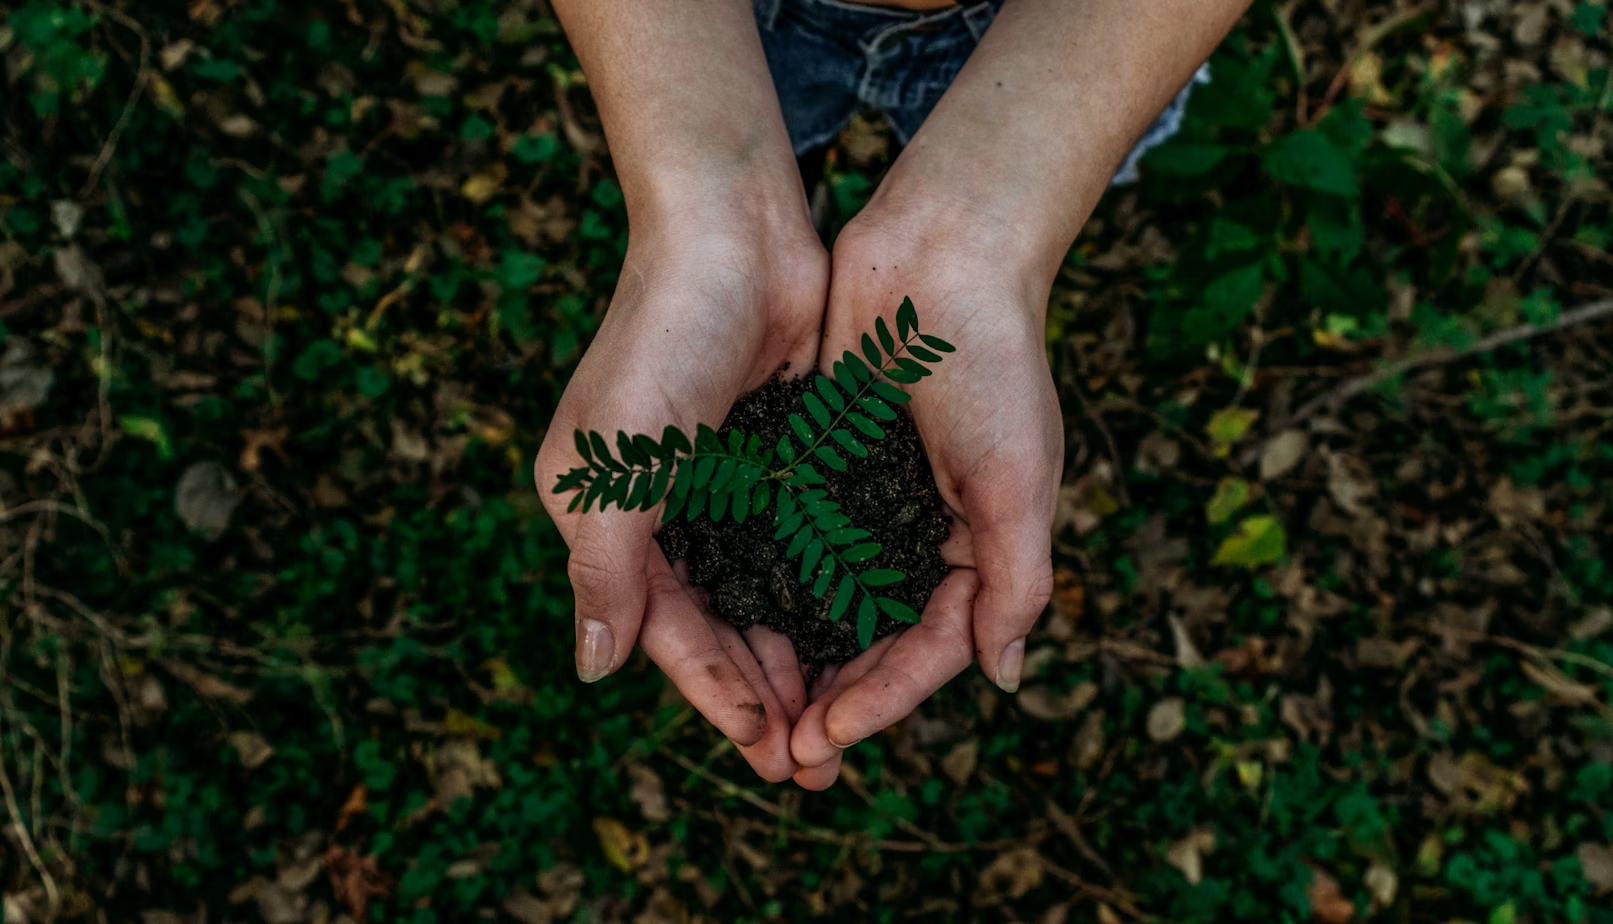 A photo of a person's hands planting a sapling in the soil